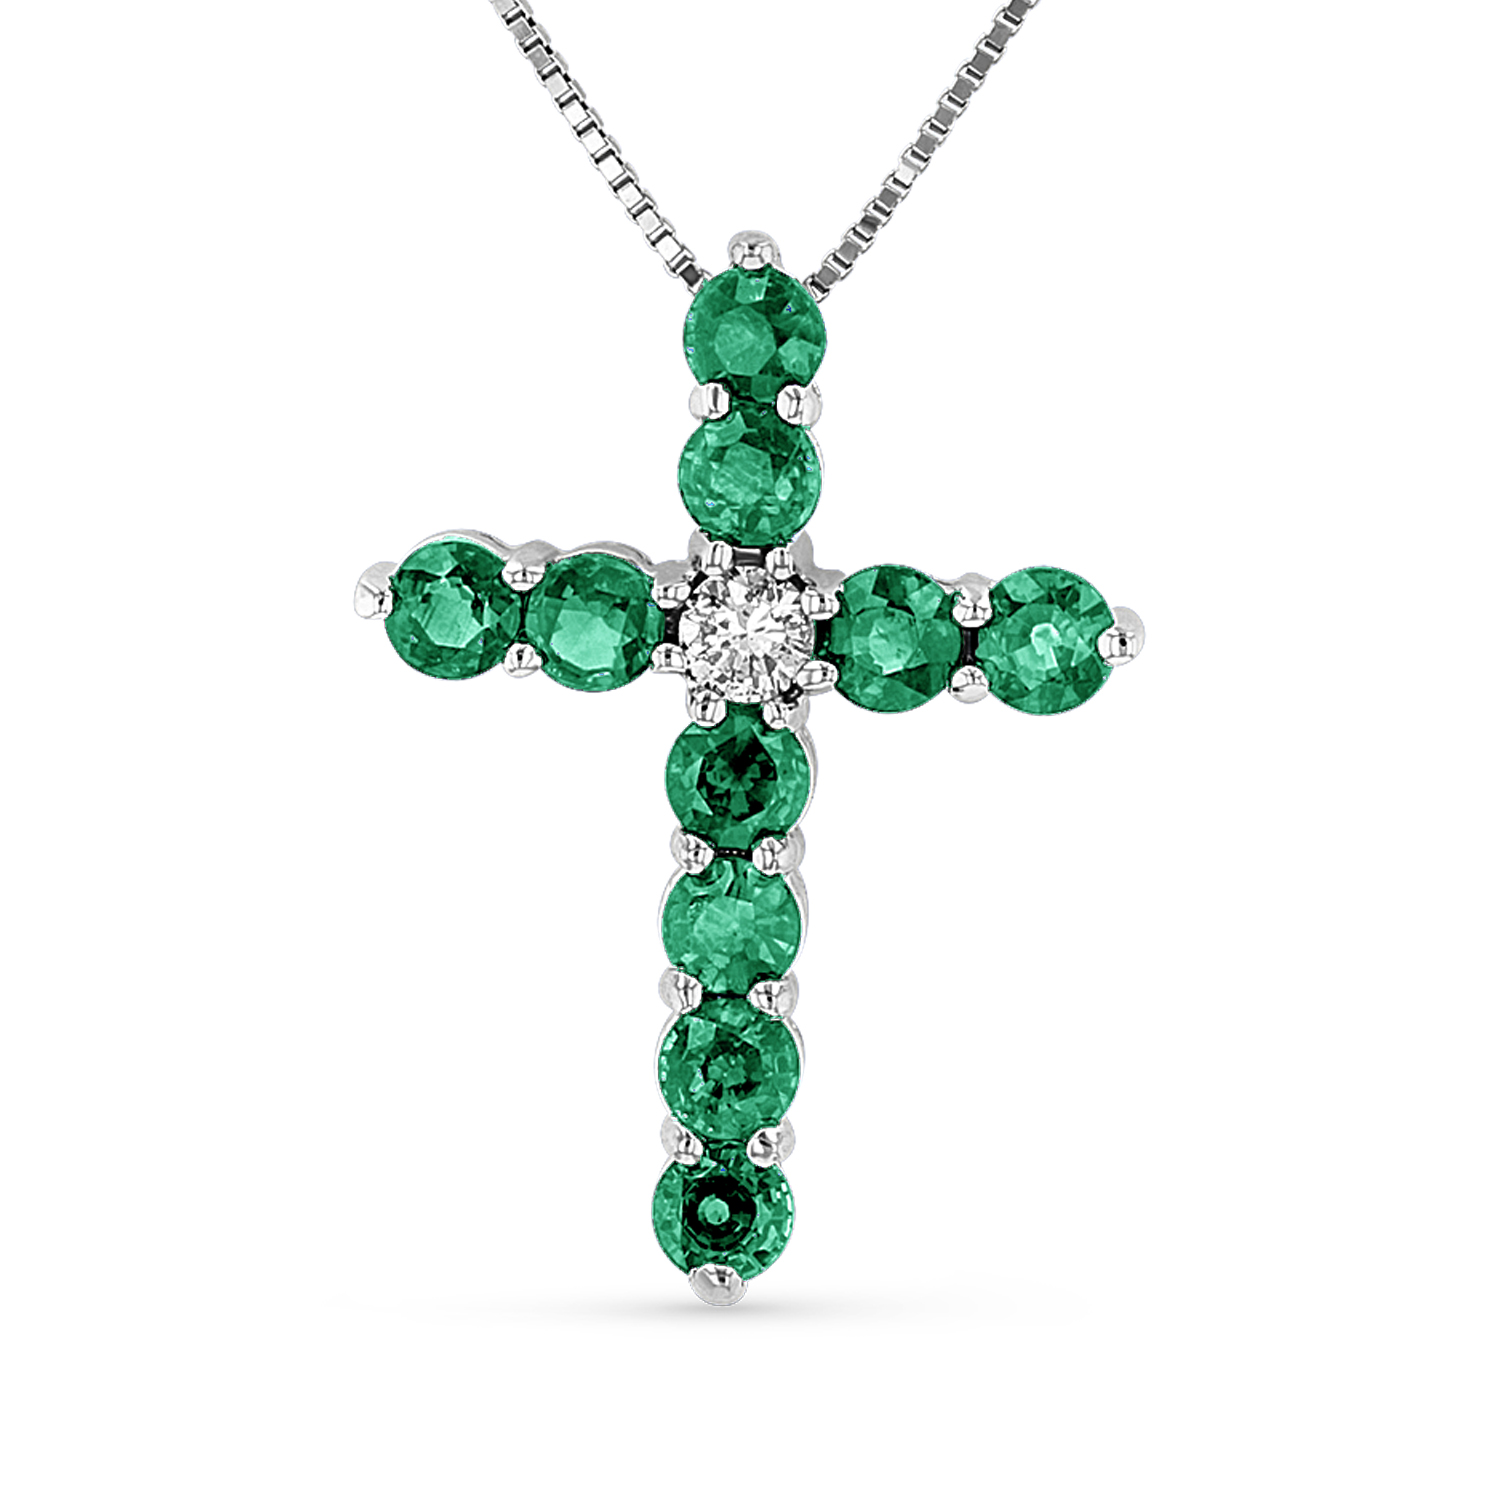 View Diamond and Eemerald Cross in 14K Gold